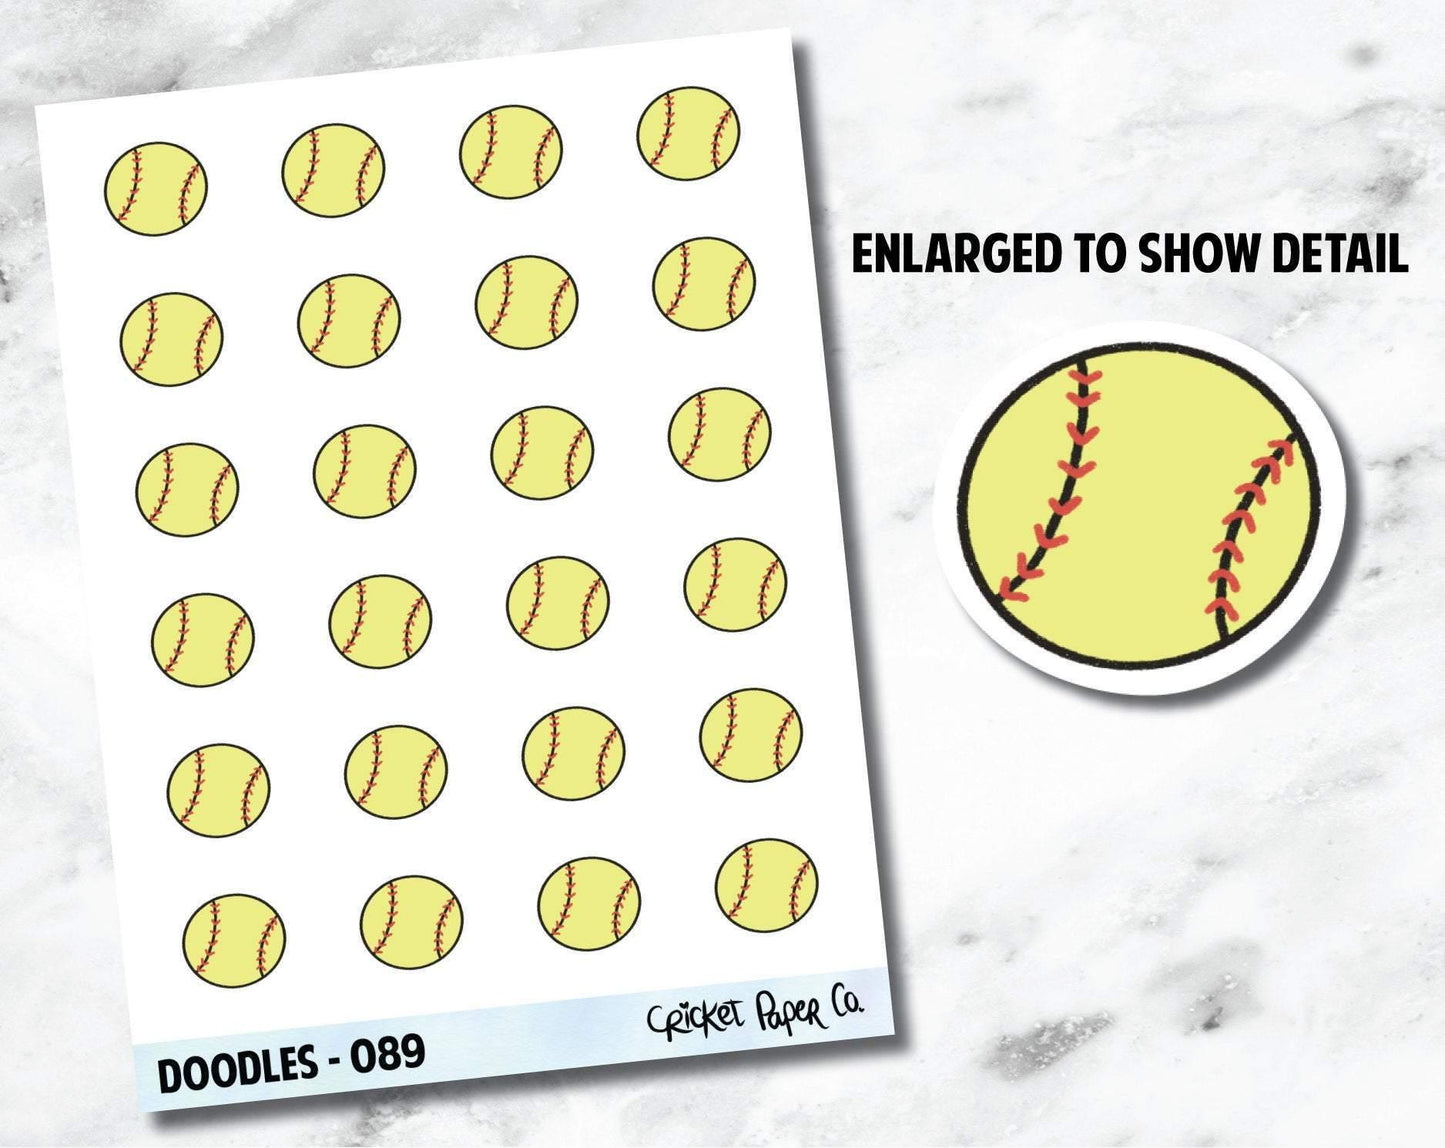 Softball, Sports, Athletics, Softball Practice, Game Hand Drawn Doodles - 089-Cricket Paper Co.